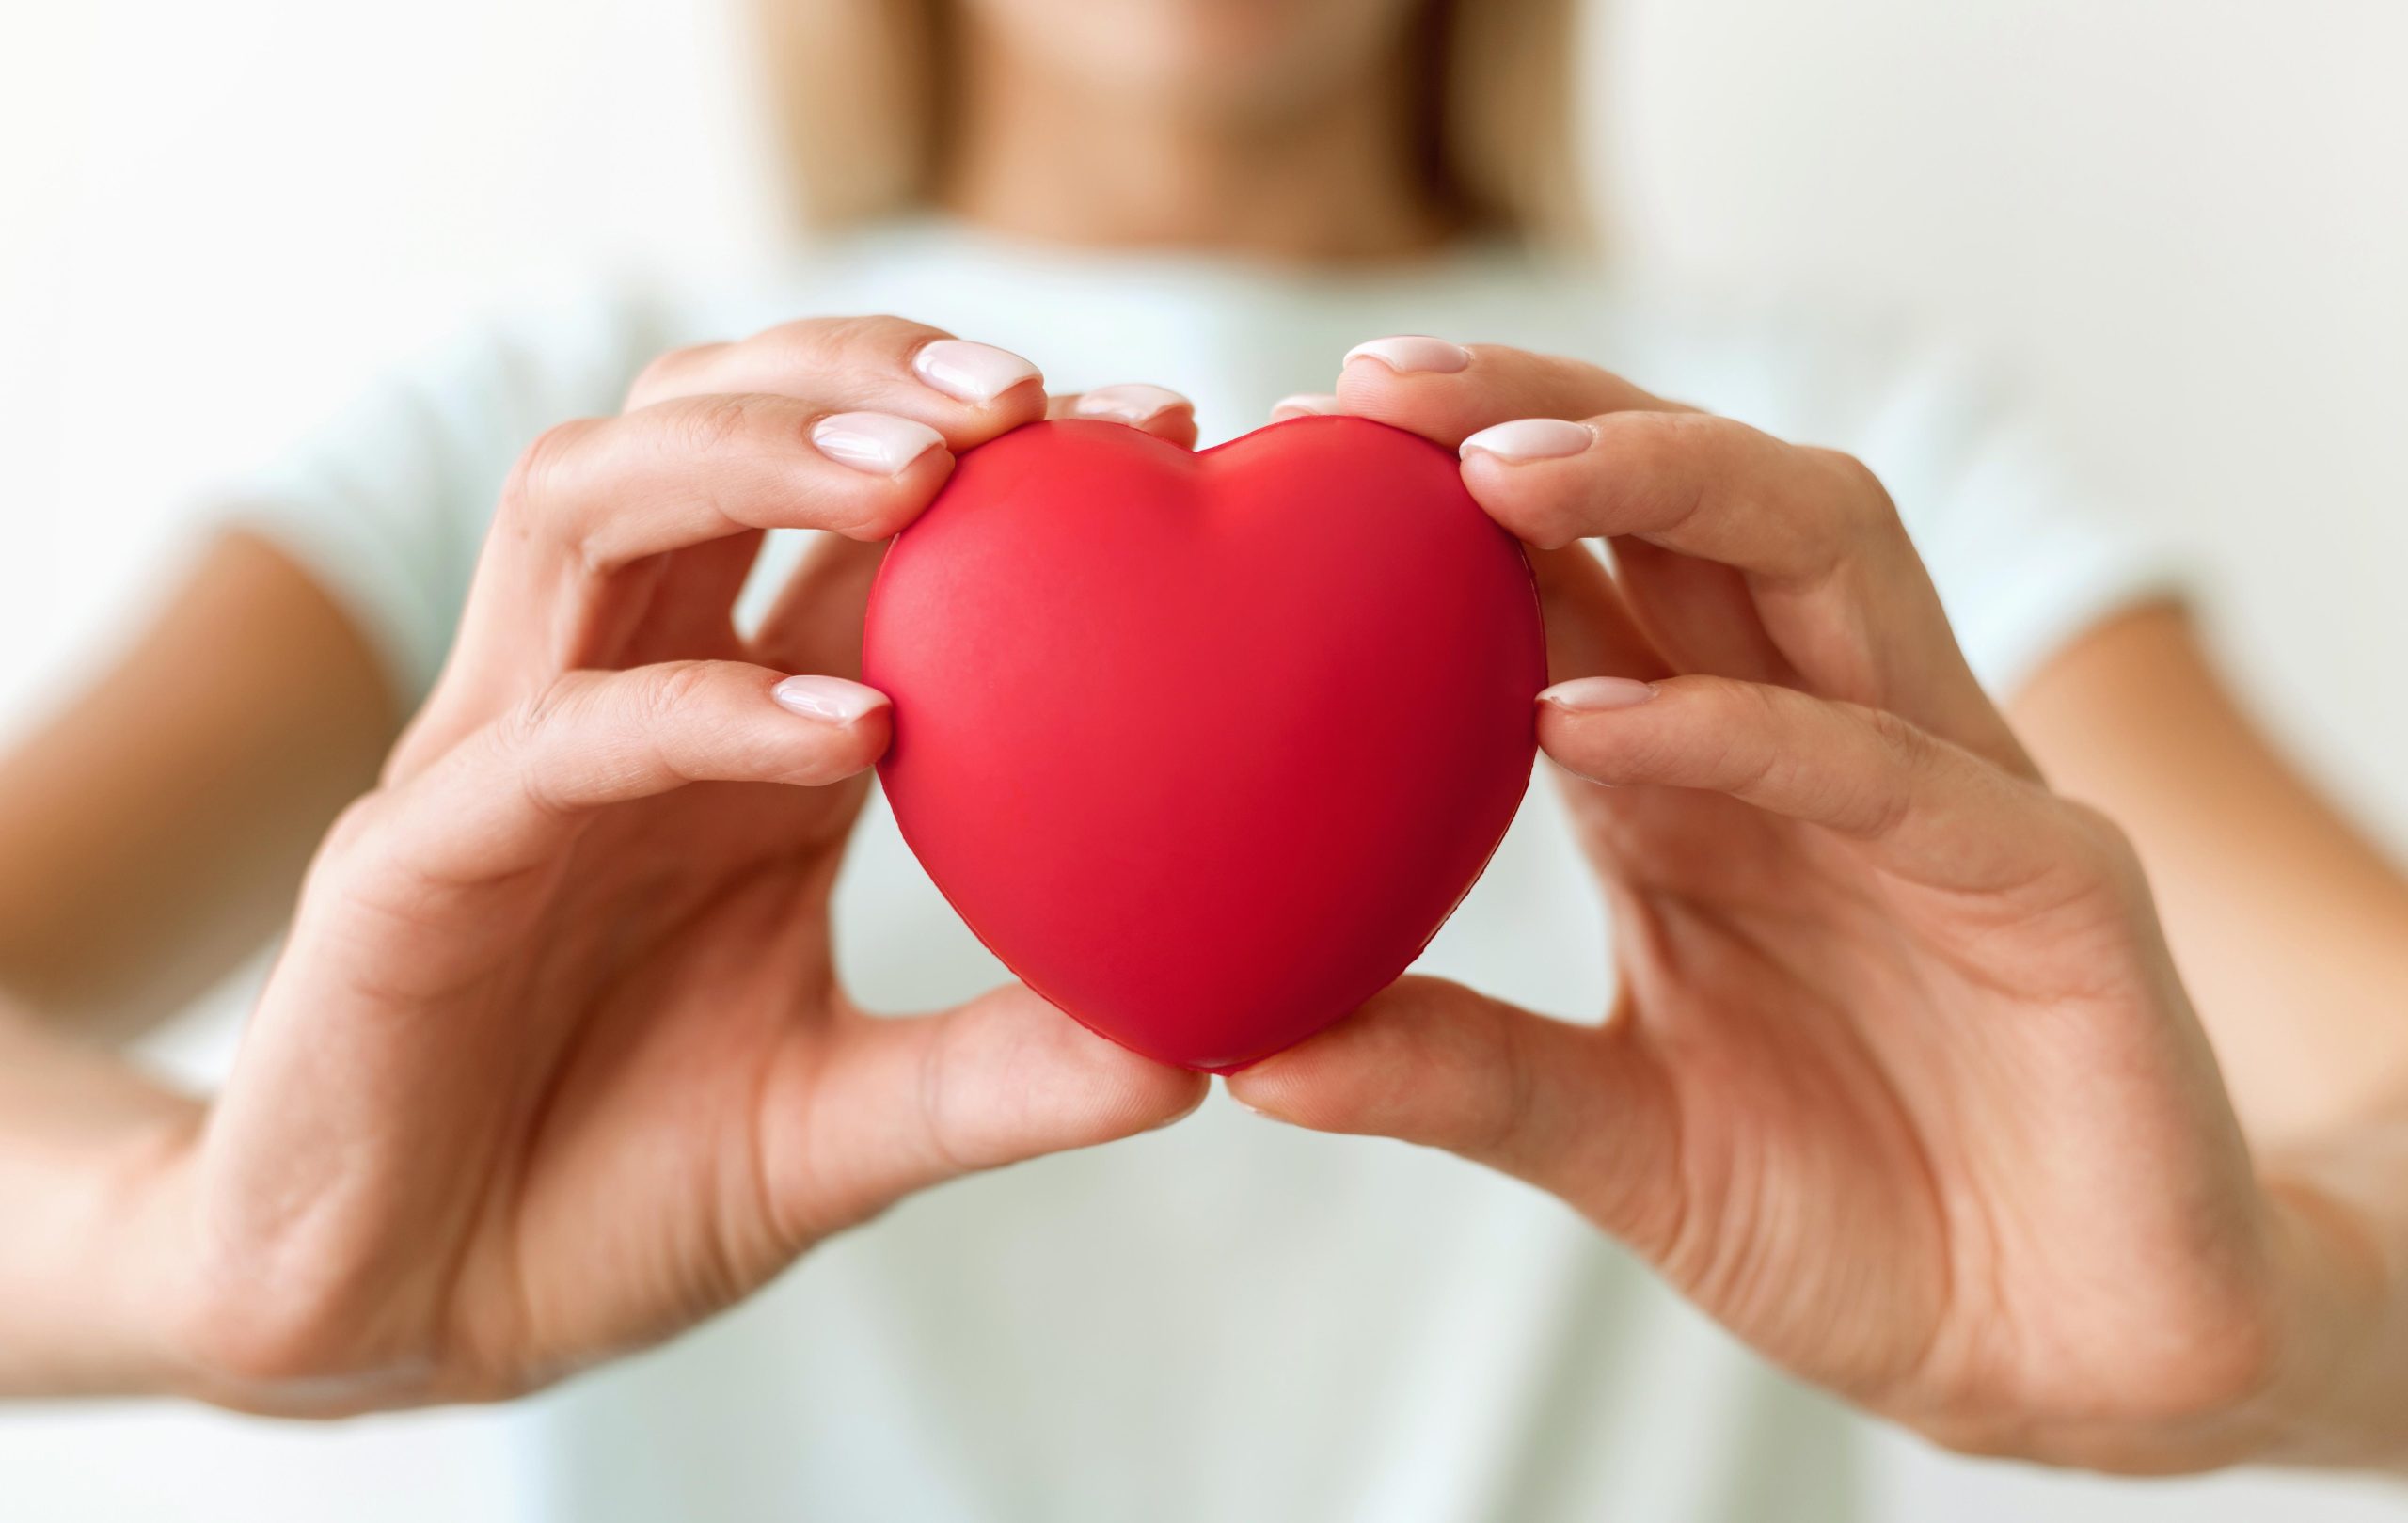 Heart Health 101: 15 Tips to Prevent Heart Disease Naturally